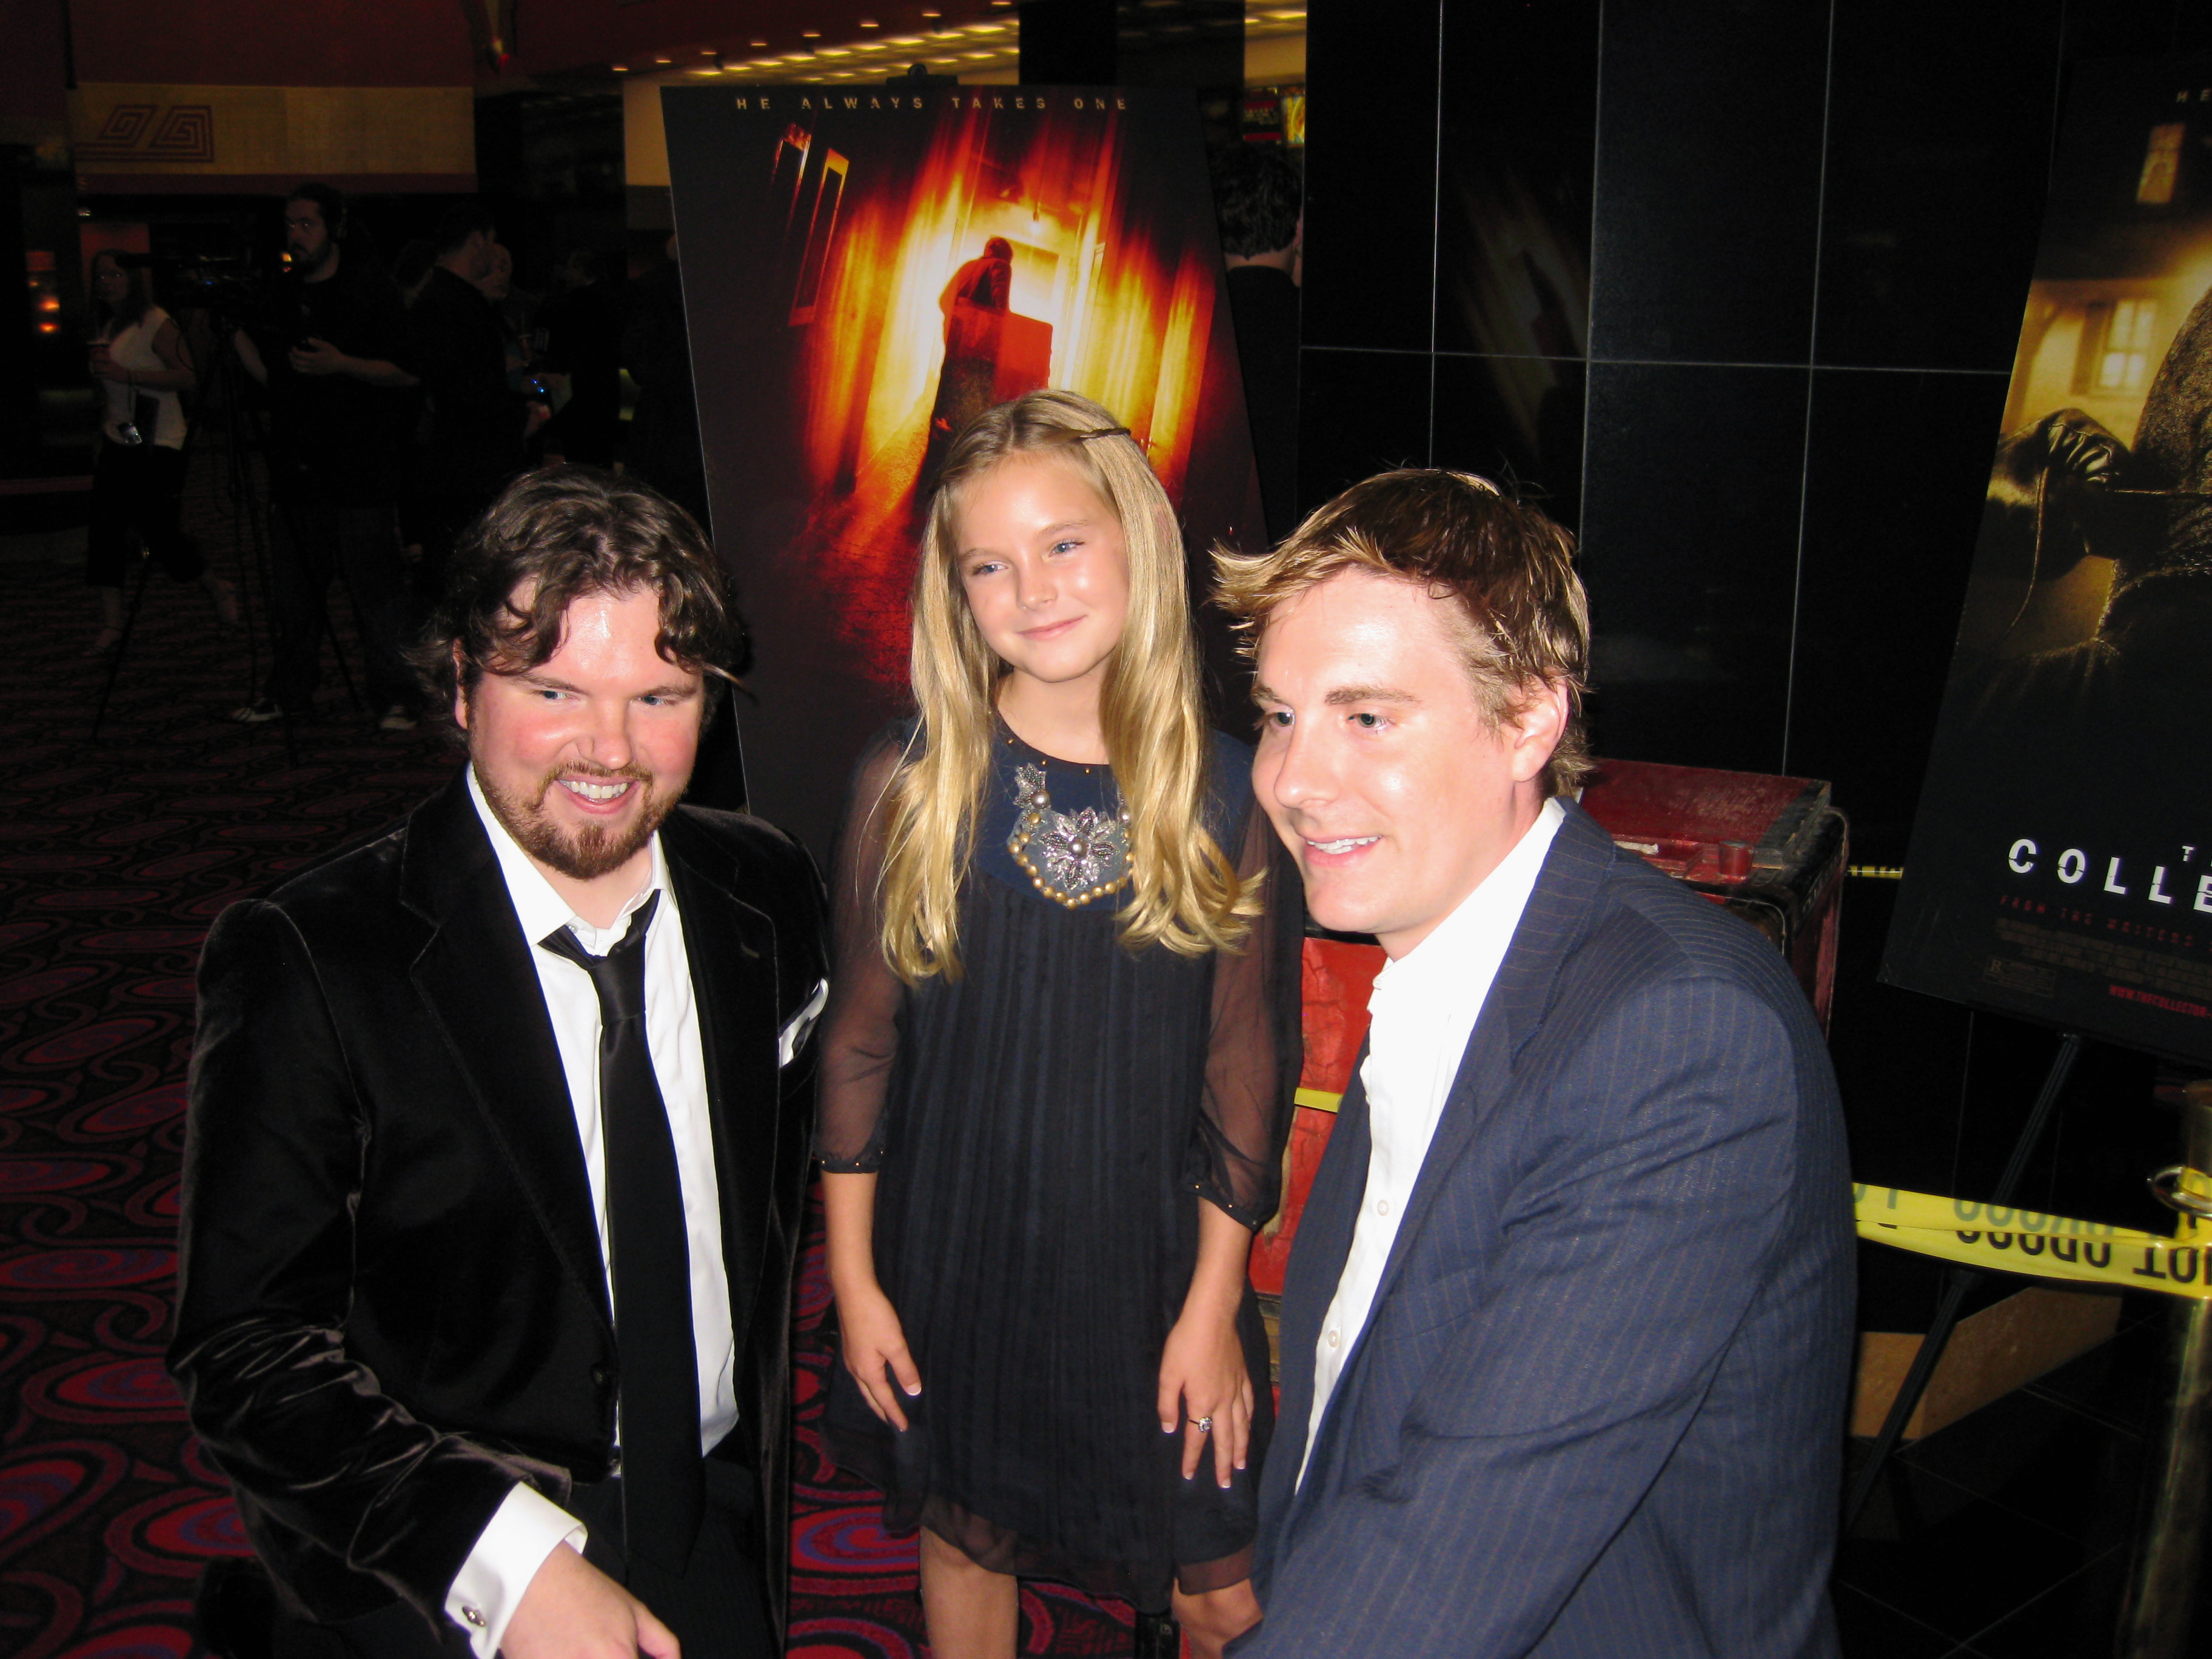 Marcus Dunstan, Karley Scott Collins and Patrick Melton at The Collector premiere.